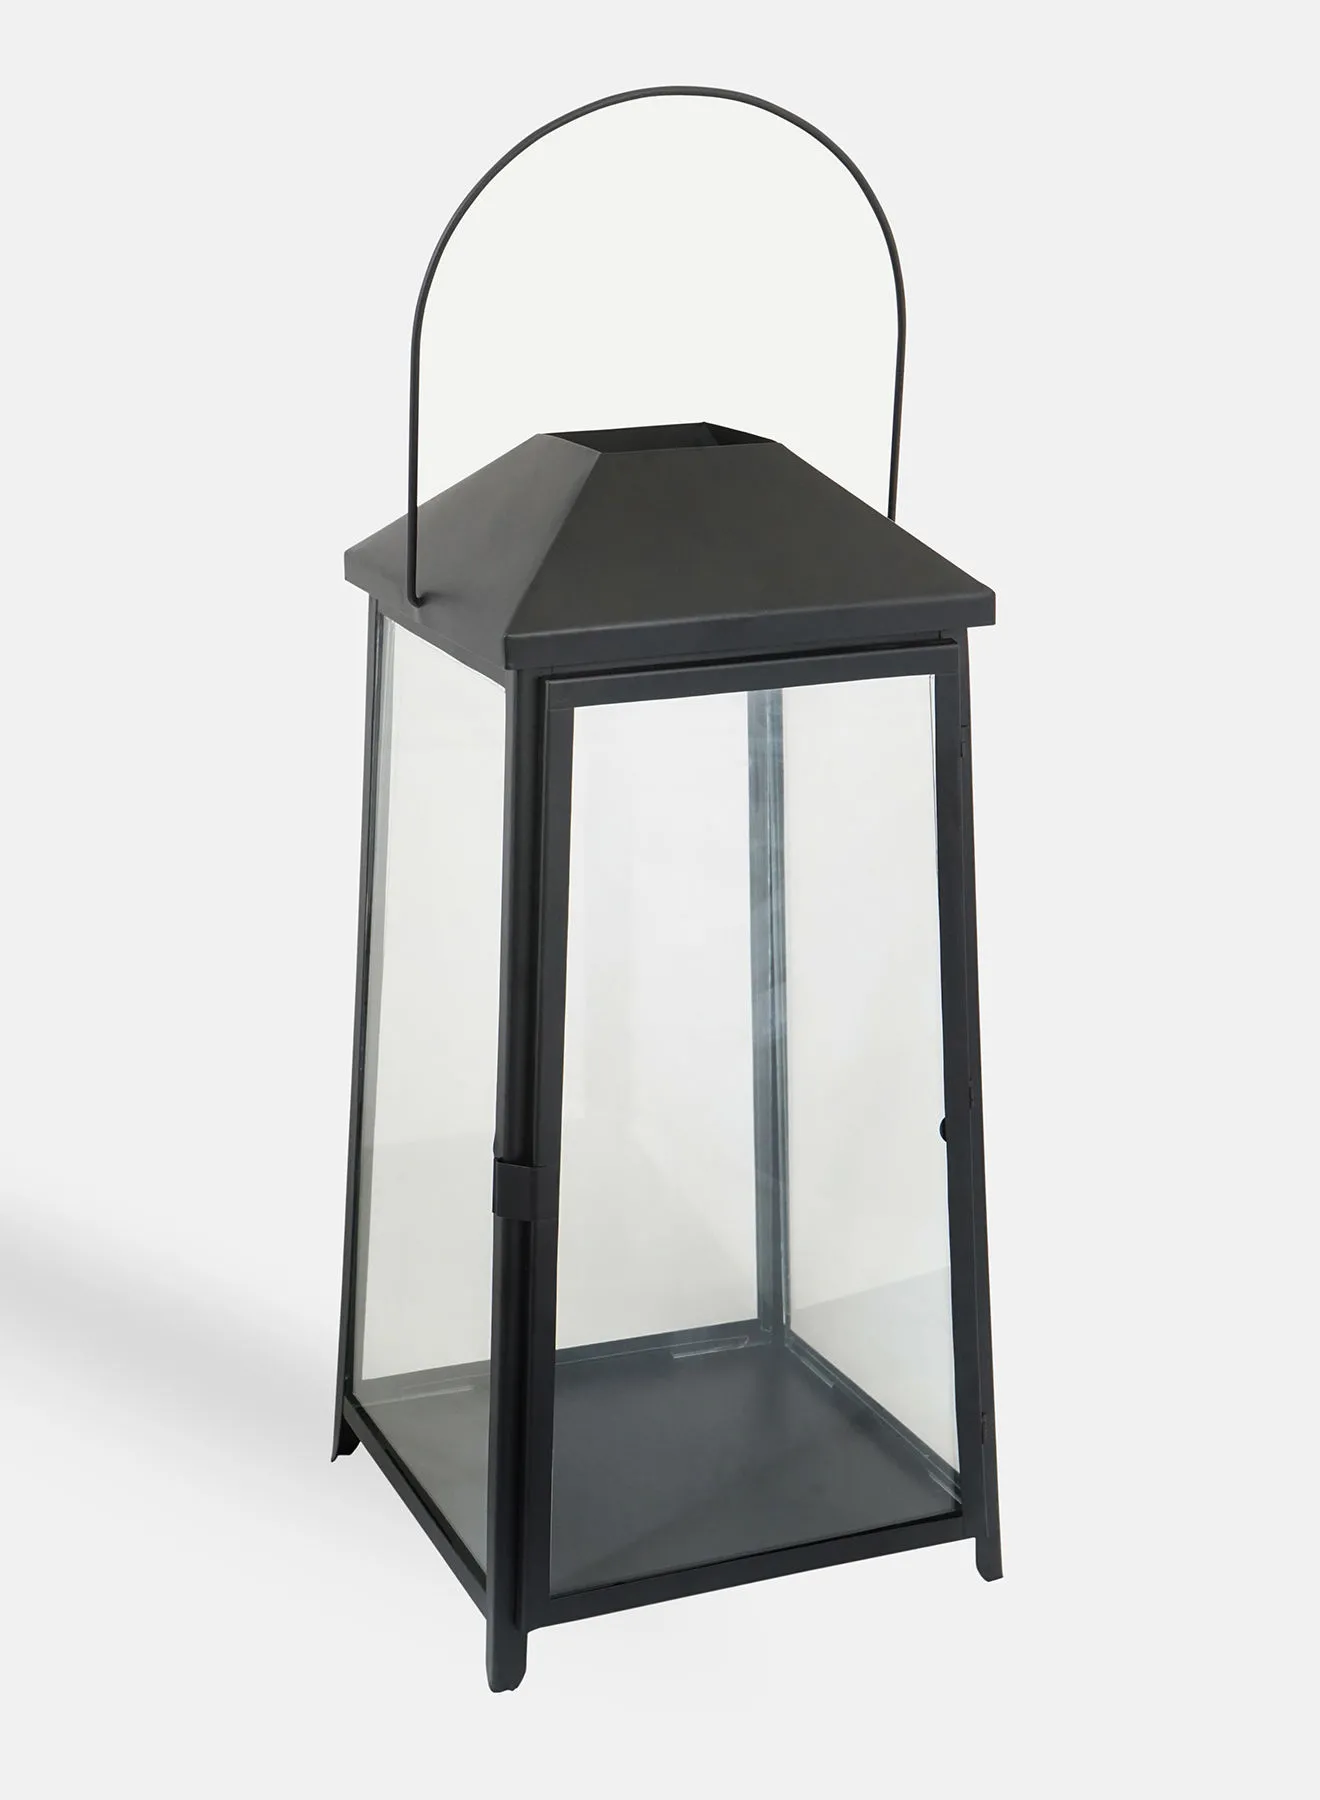 ebb & flow Stylish Handmade Candle Holder Lantern Unique Luxury Quality Scents For The Perfect Stylish Home Black 25.4 x 25.4 x 54centimeter